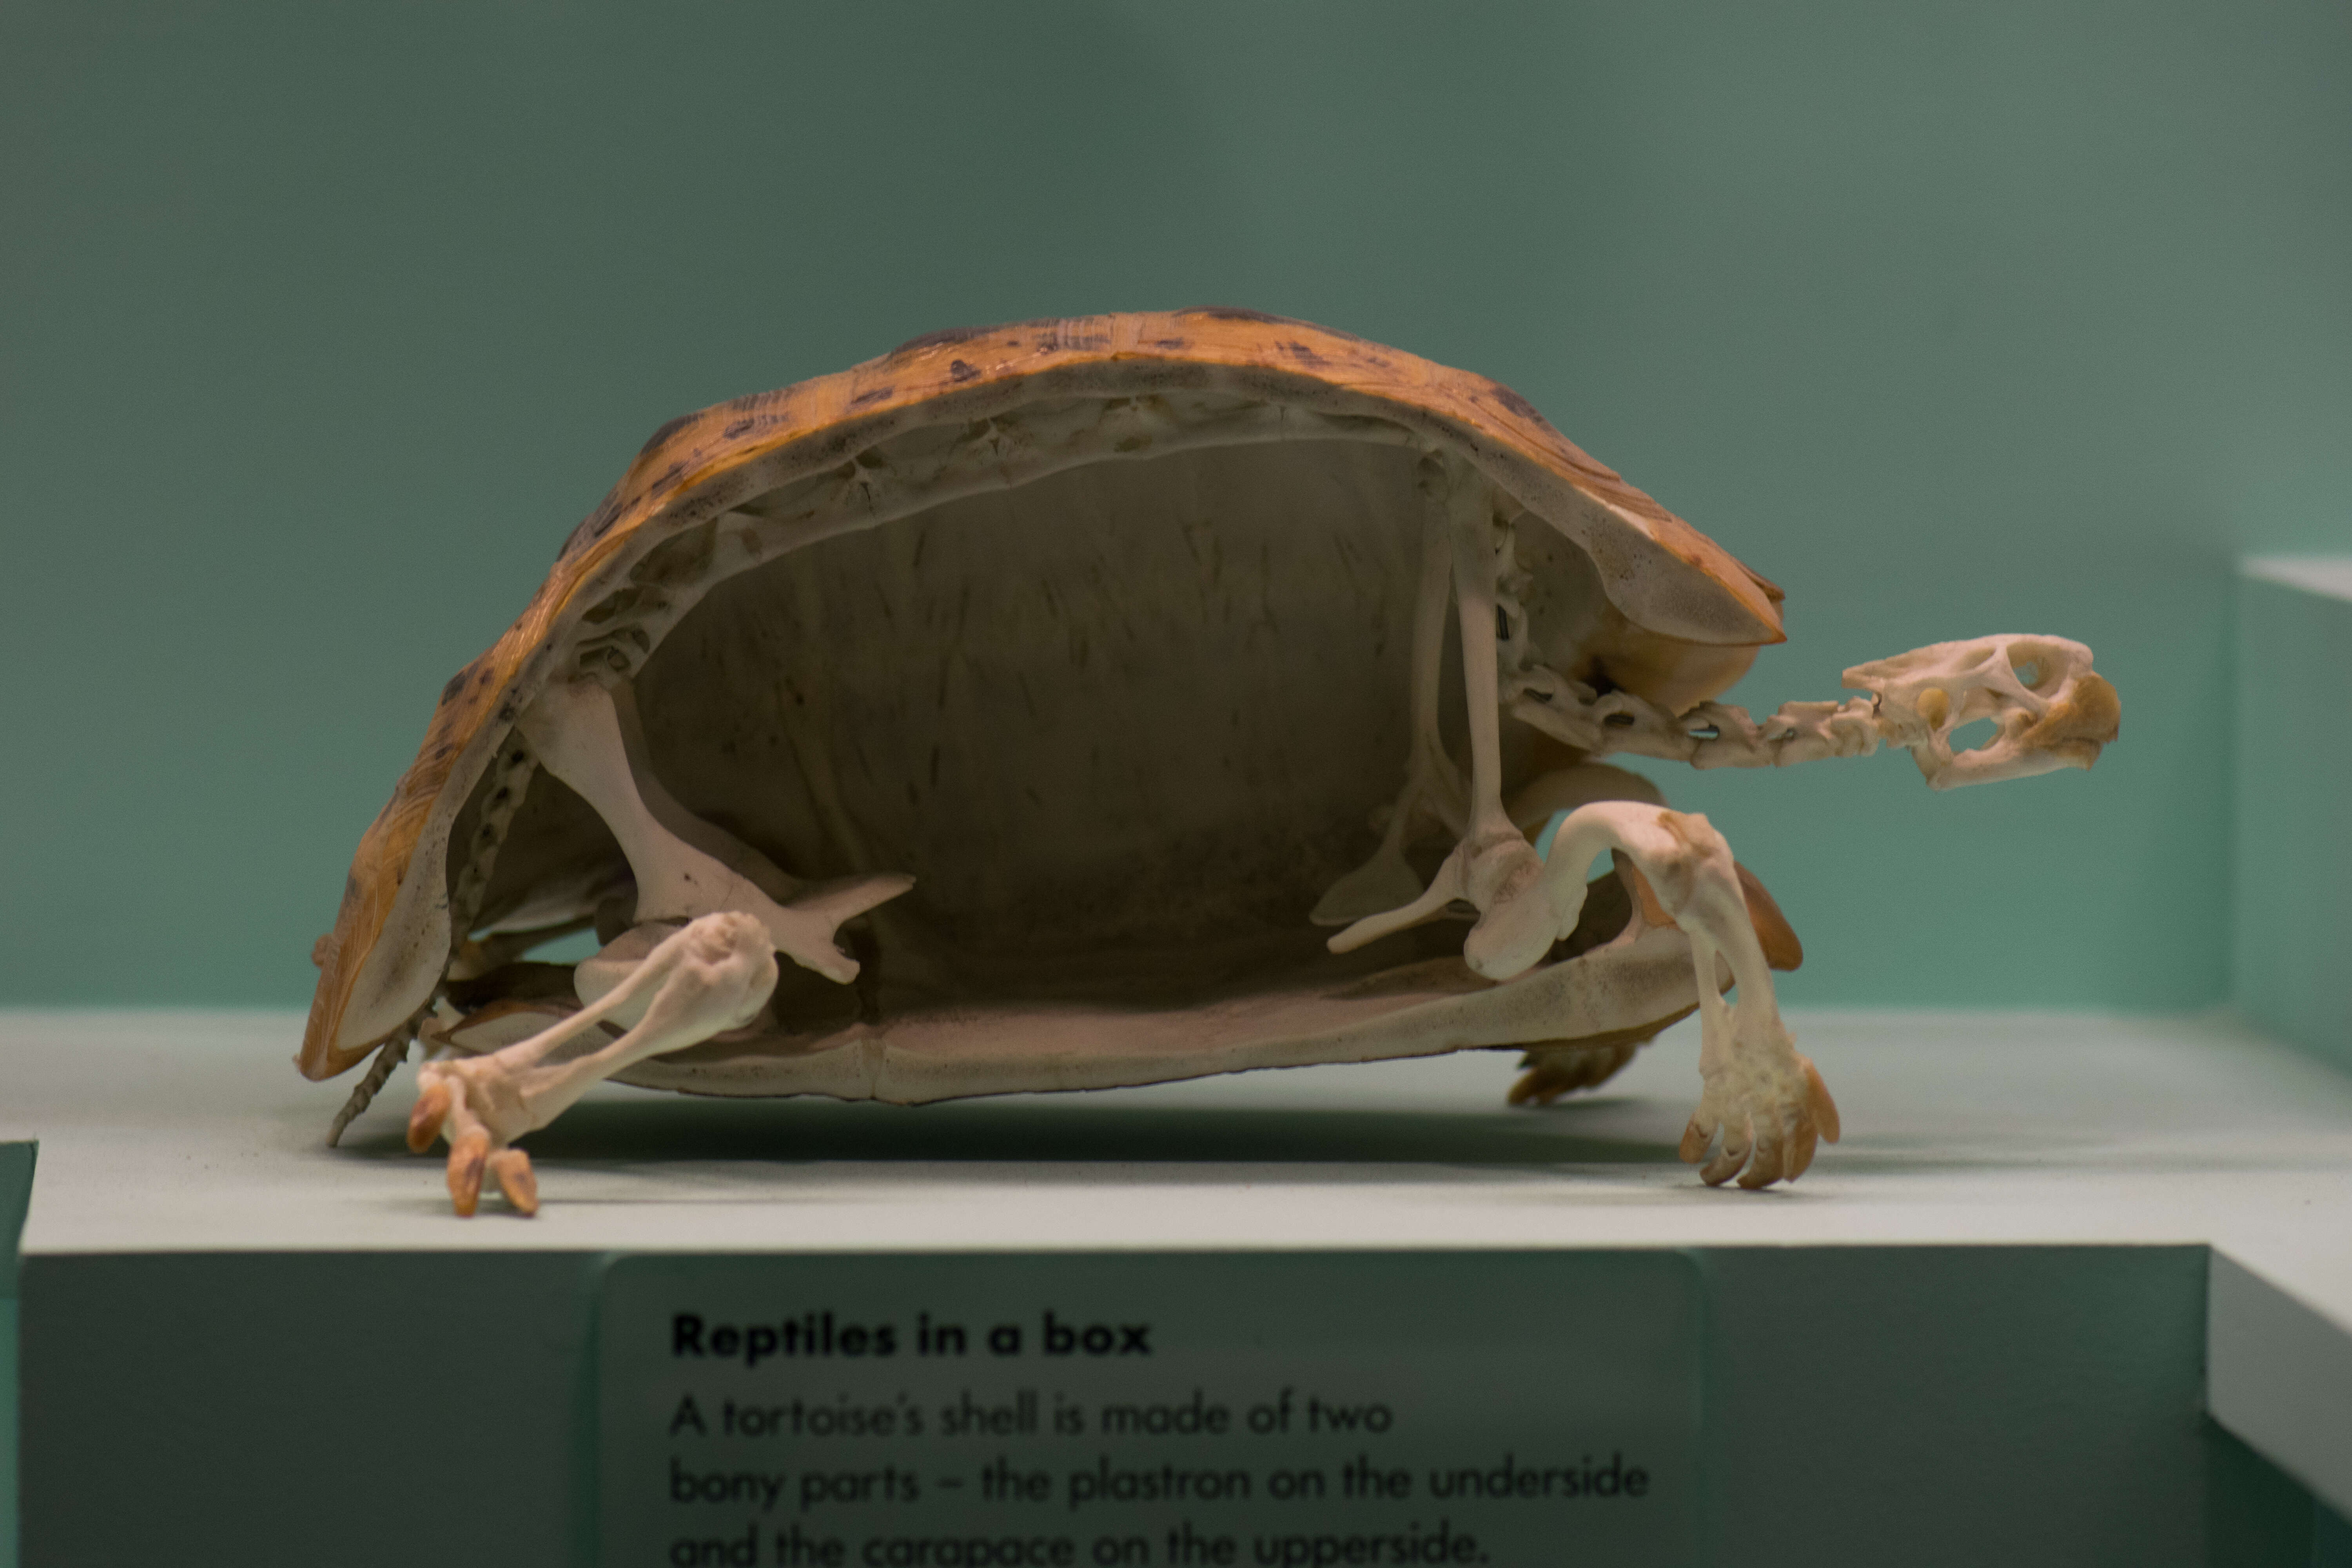 File:Plastron of a turtle shell.jpg - Wikimedia Commons